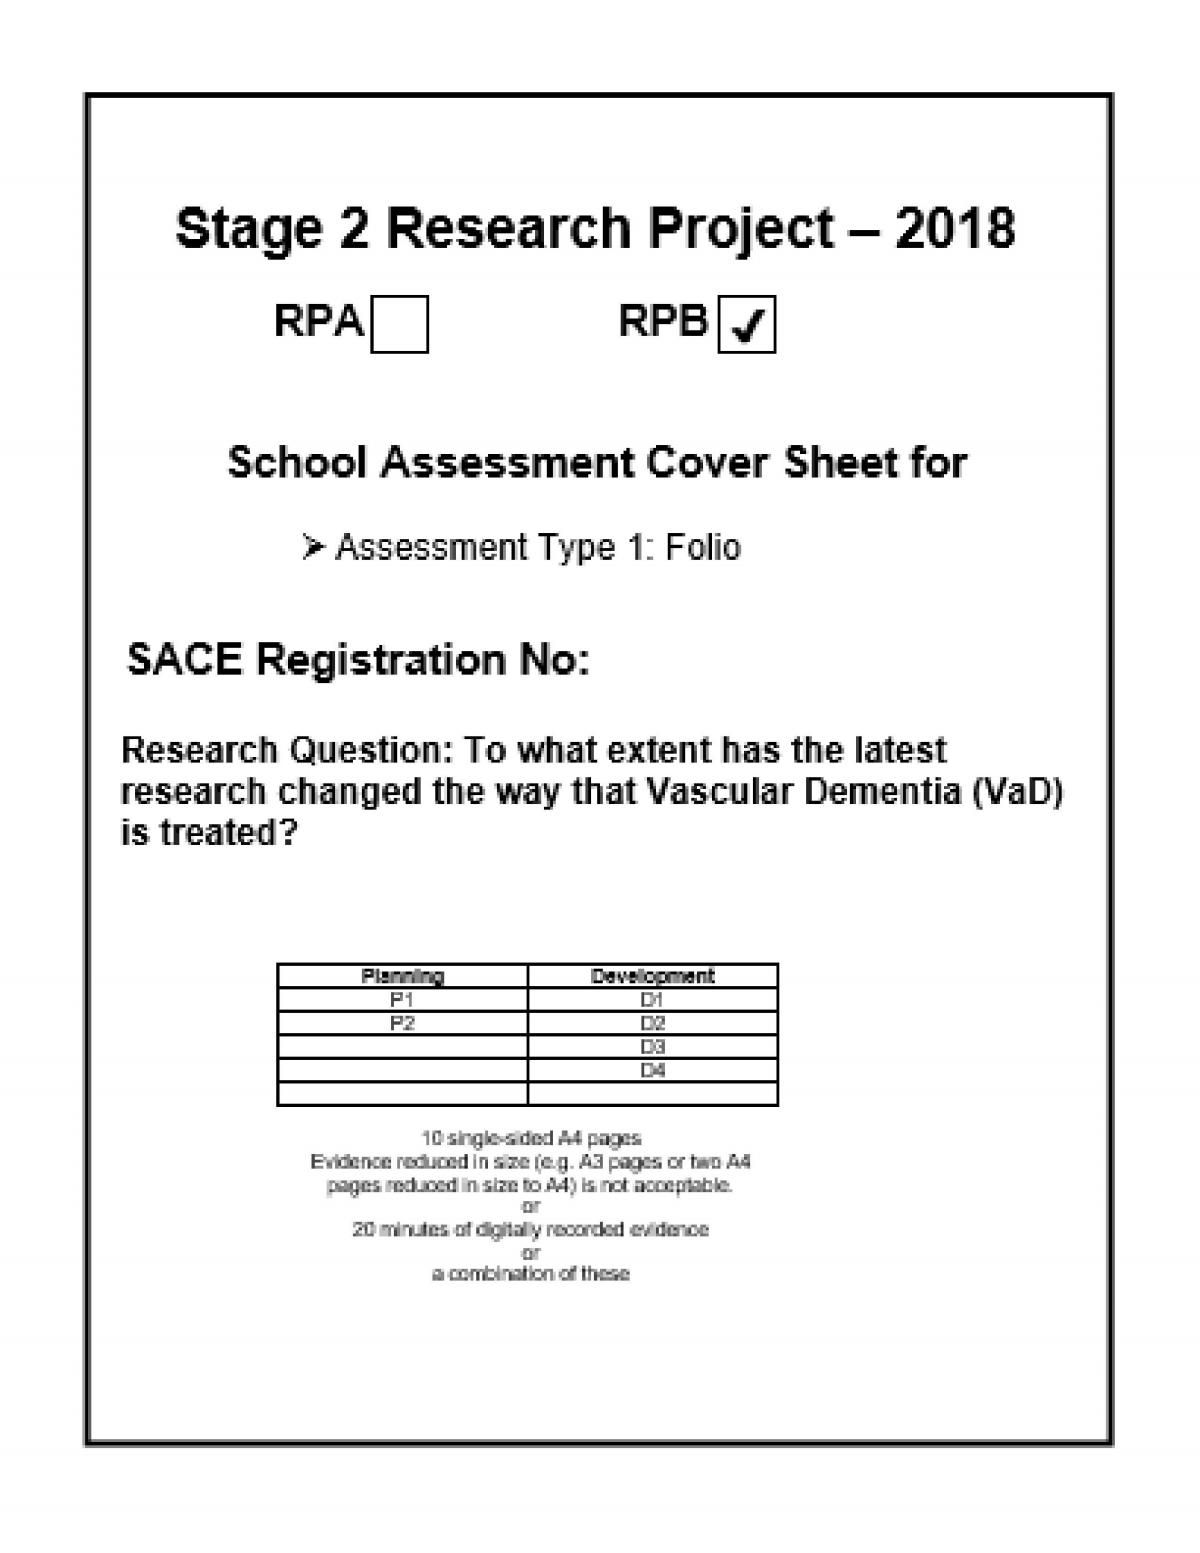 new research project sace